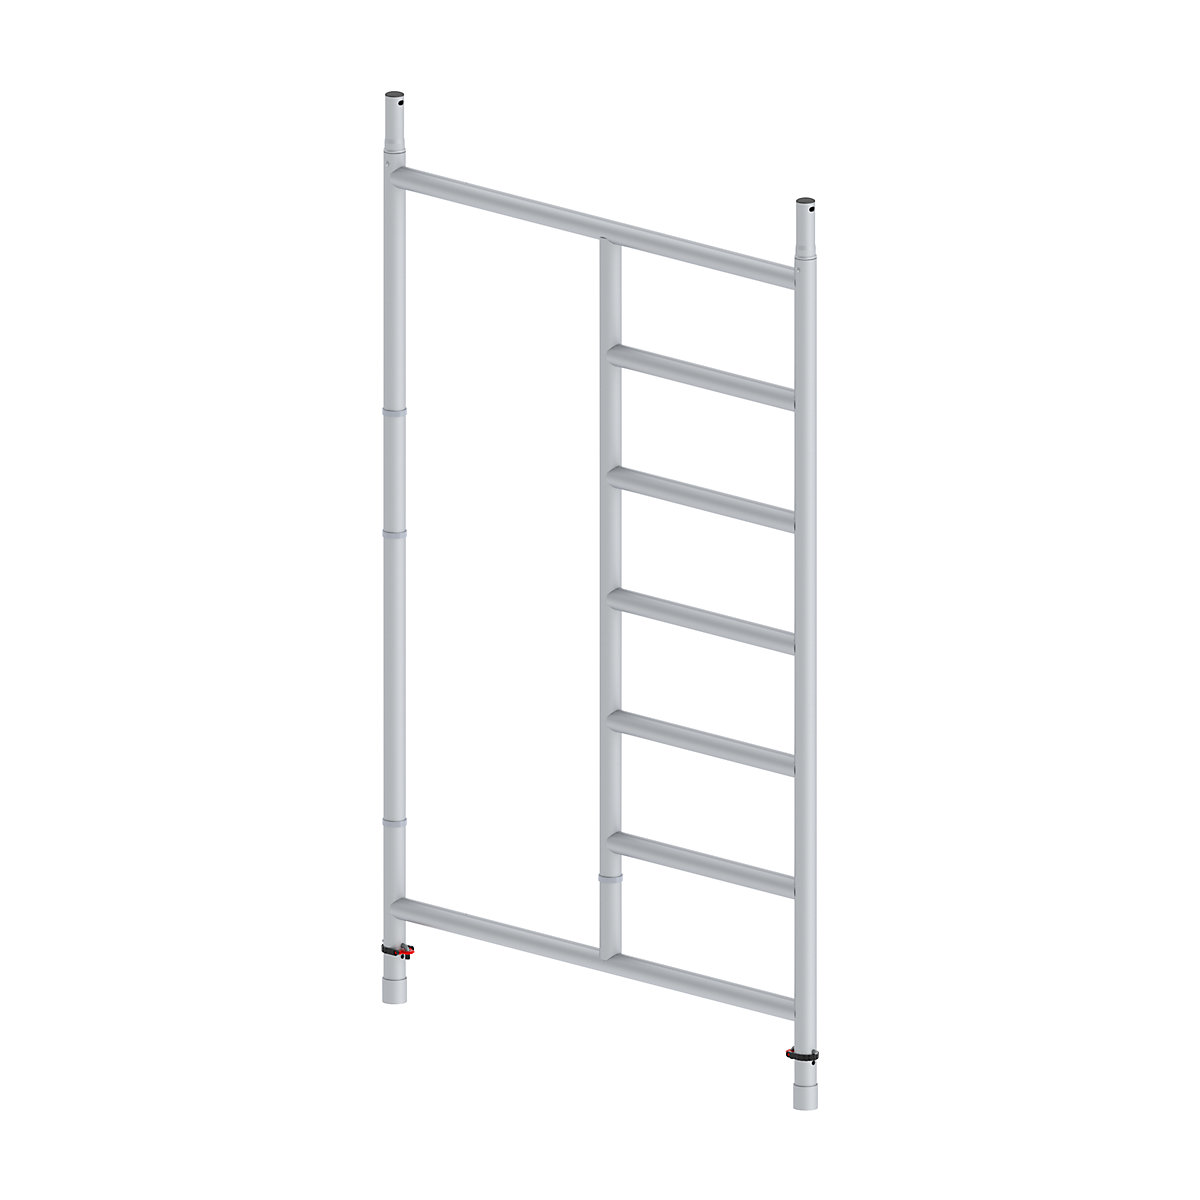 Walkthrough frame – Altrex, for RS TOWER 5 series mobile access towers, for width 1.35 m, opening at the side-1